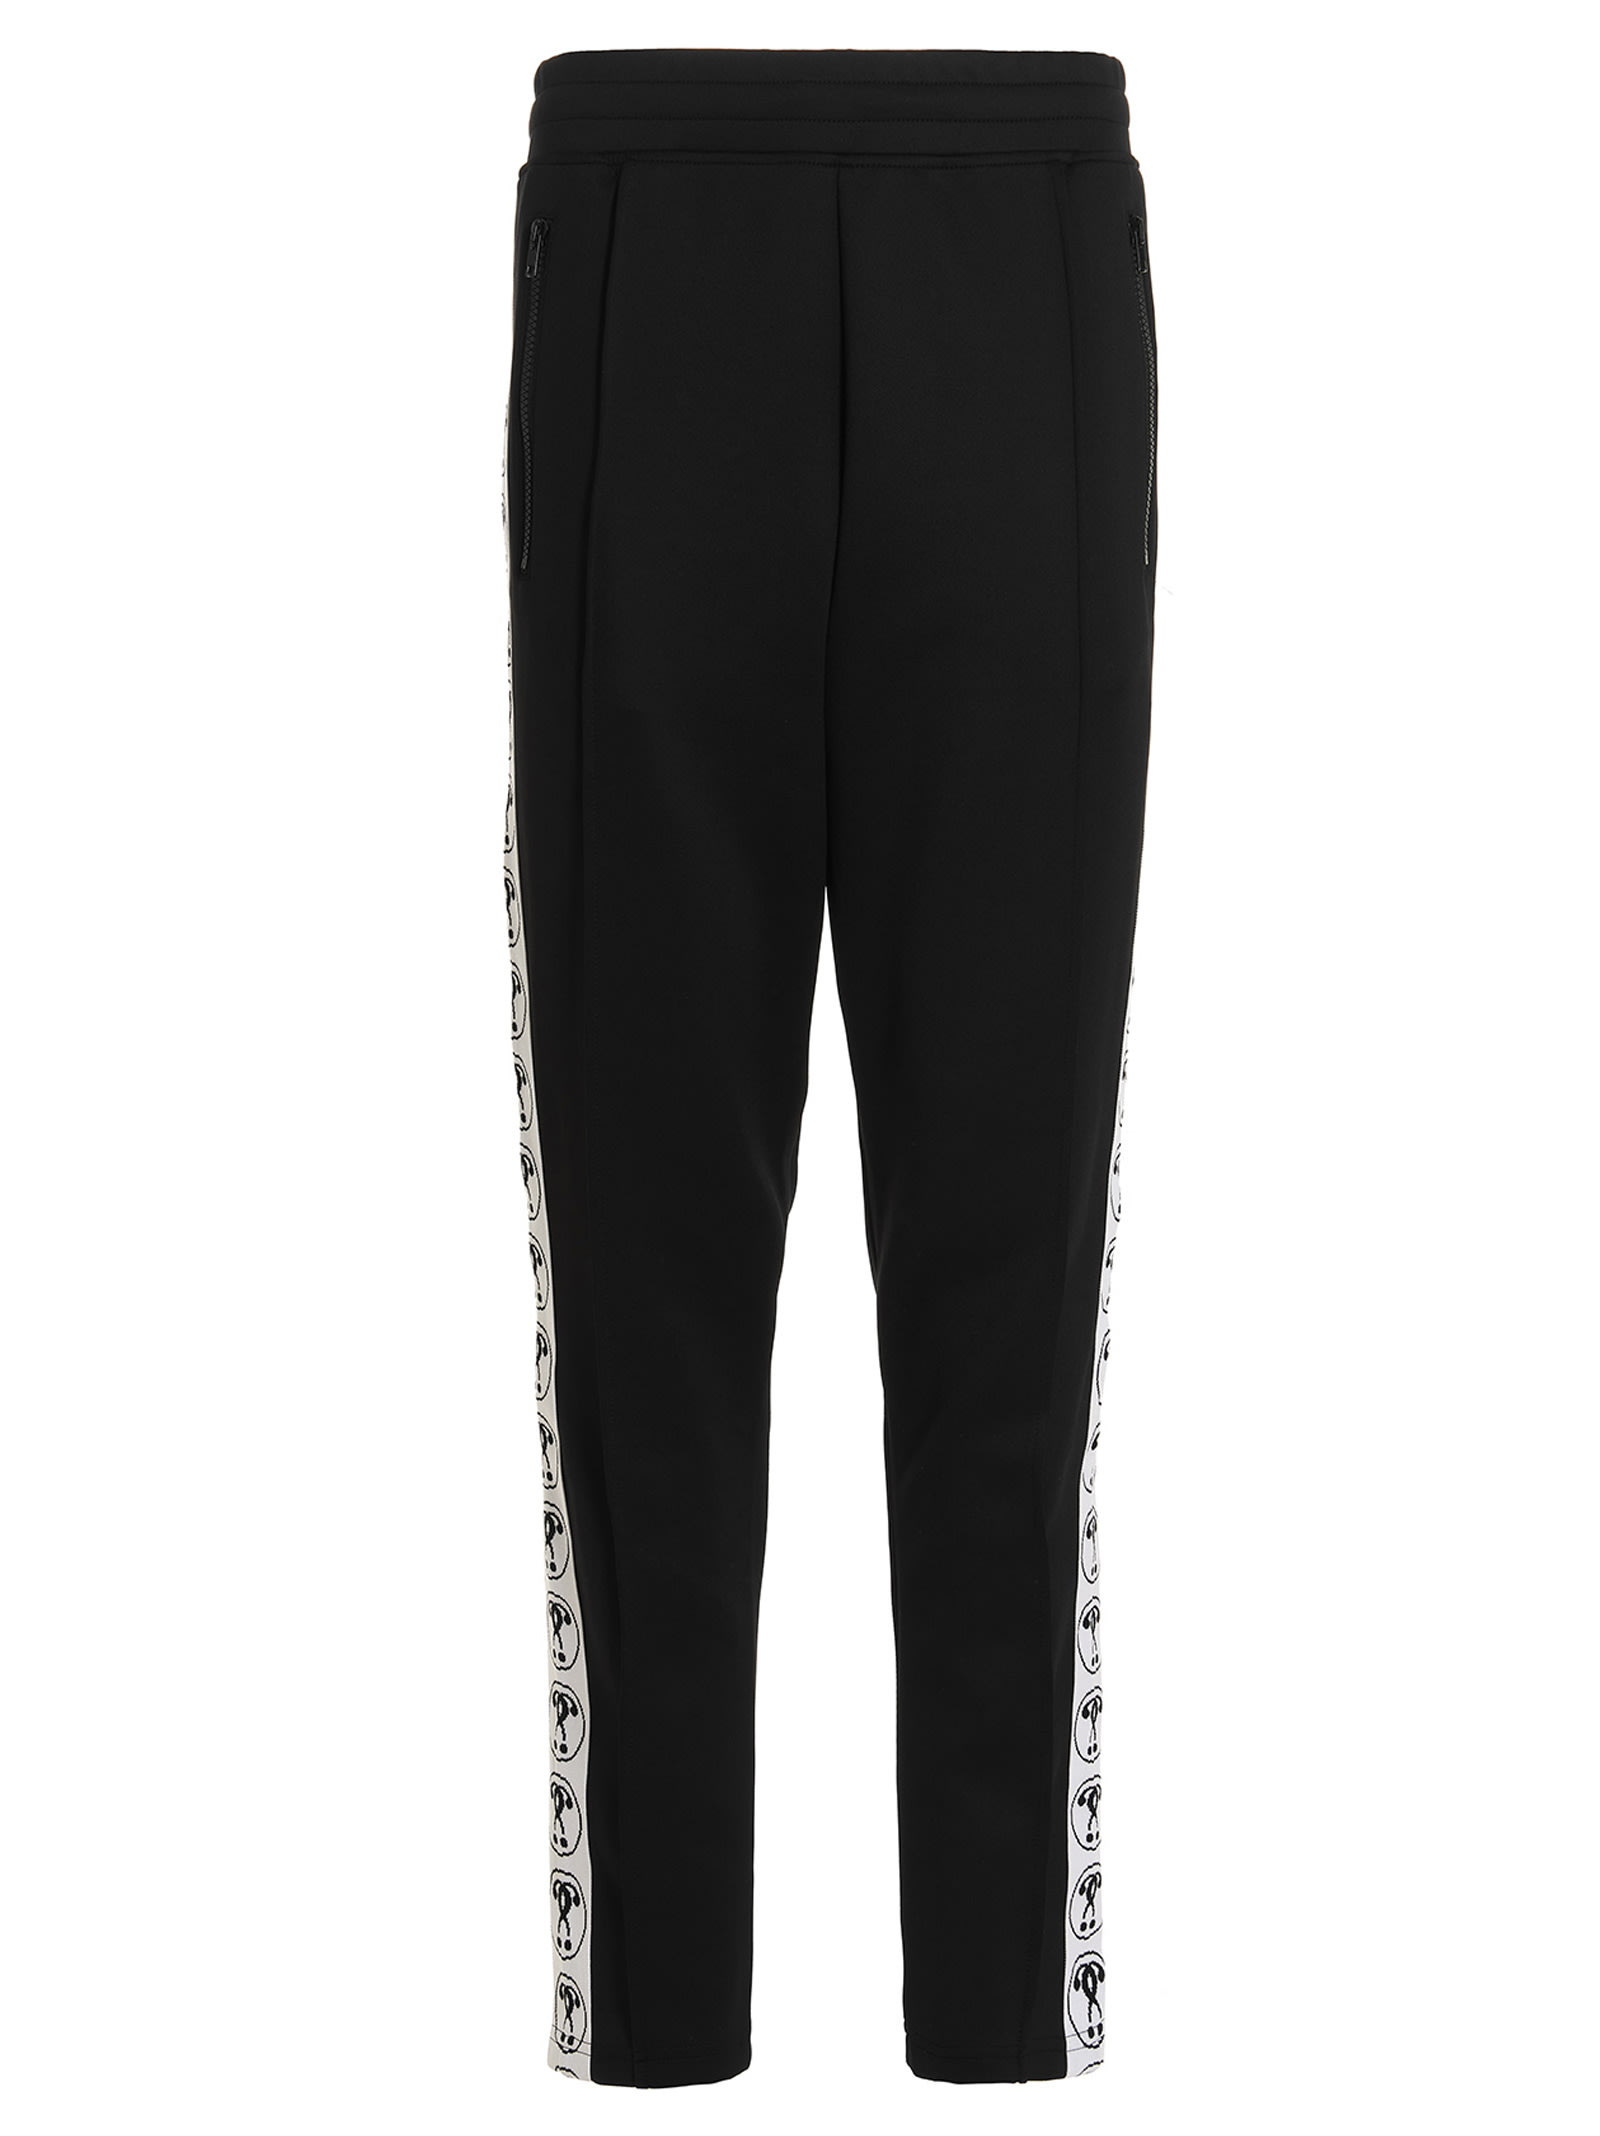 Moschino double Question Mark Joggers